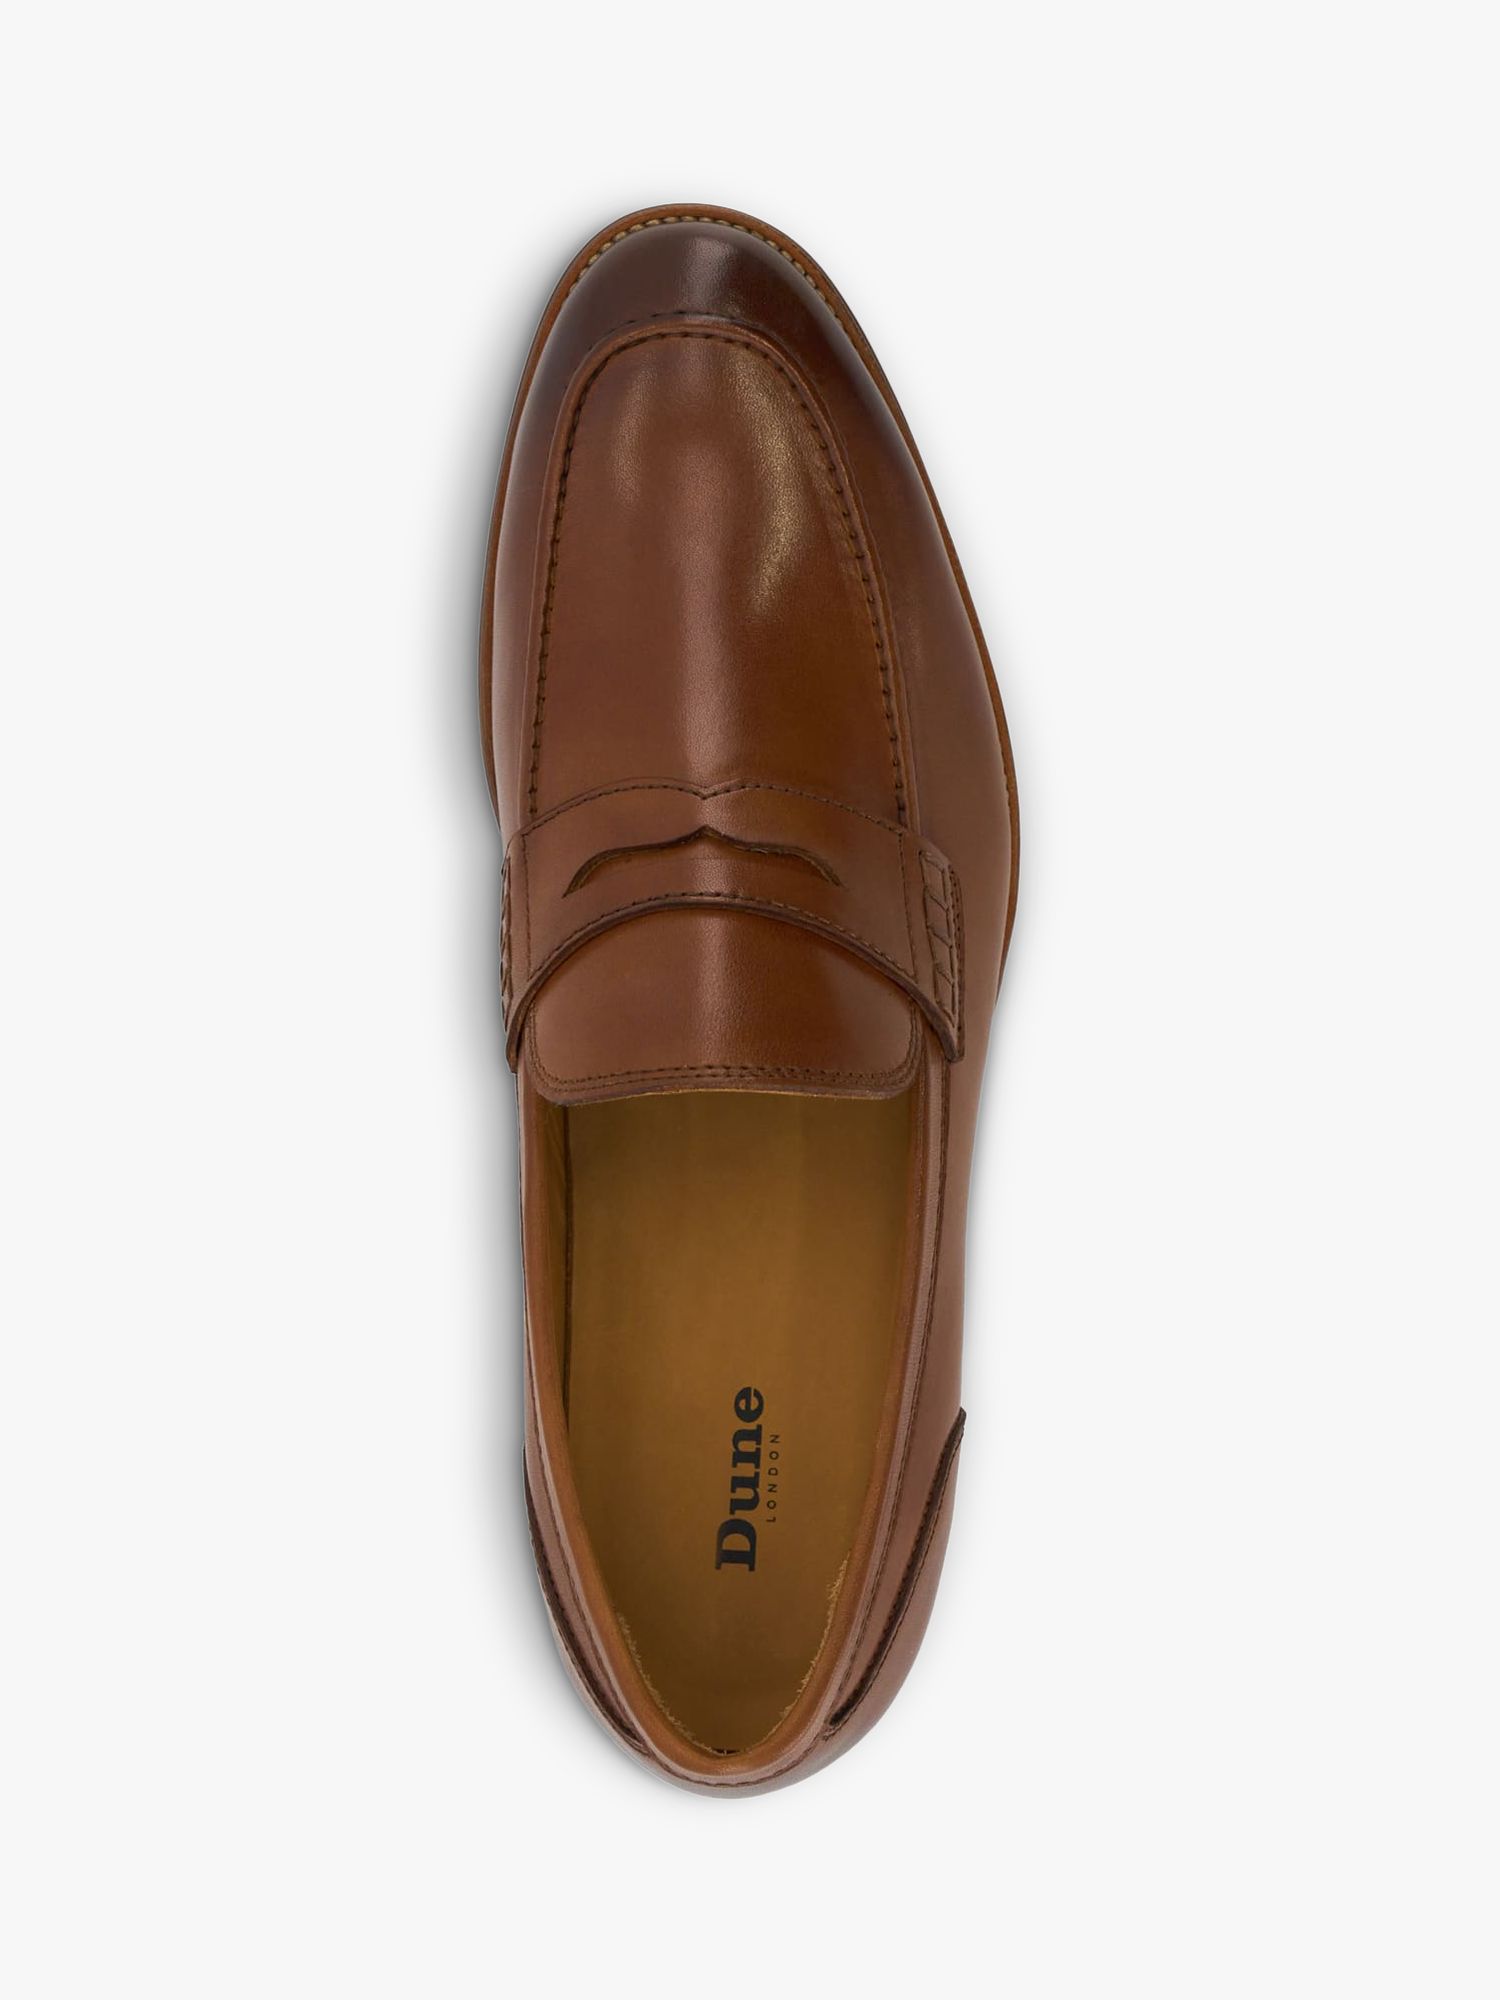 Dune Sulli Leather Moccasin Shoes, Tan at John Lewis & Partners